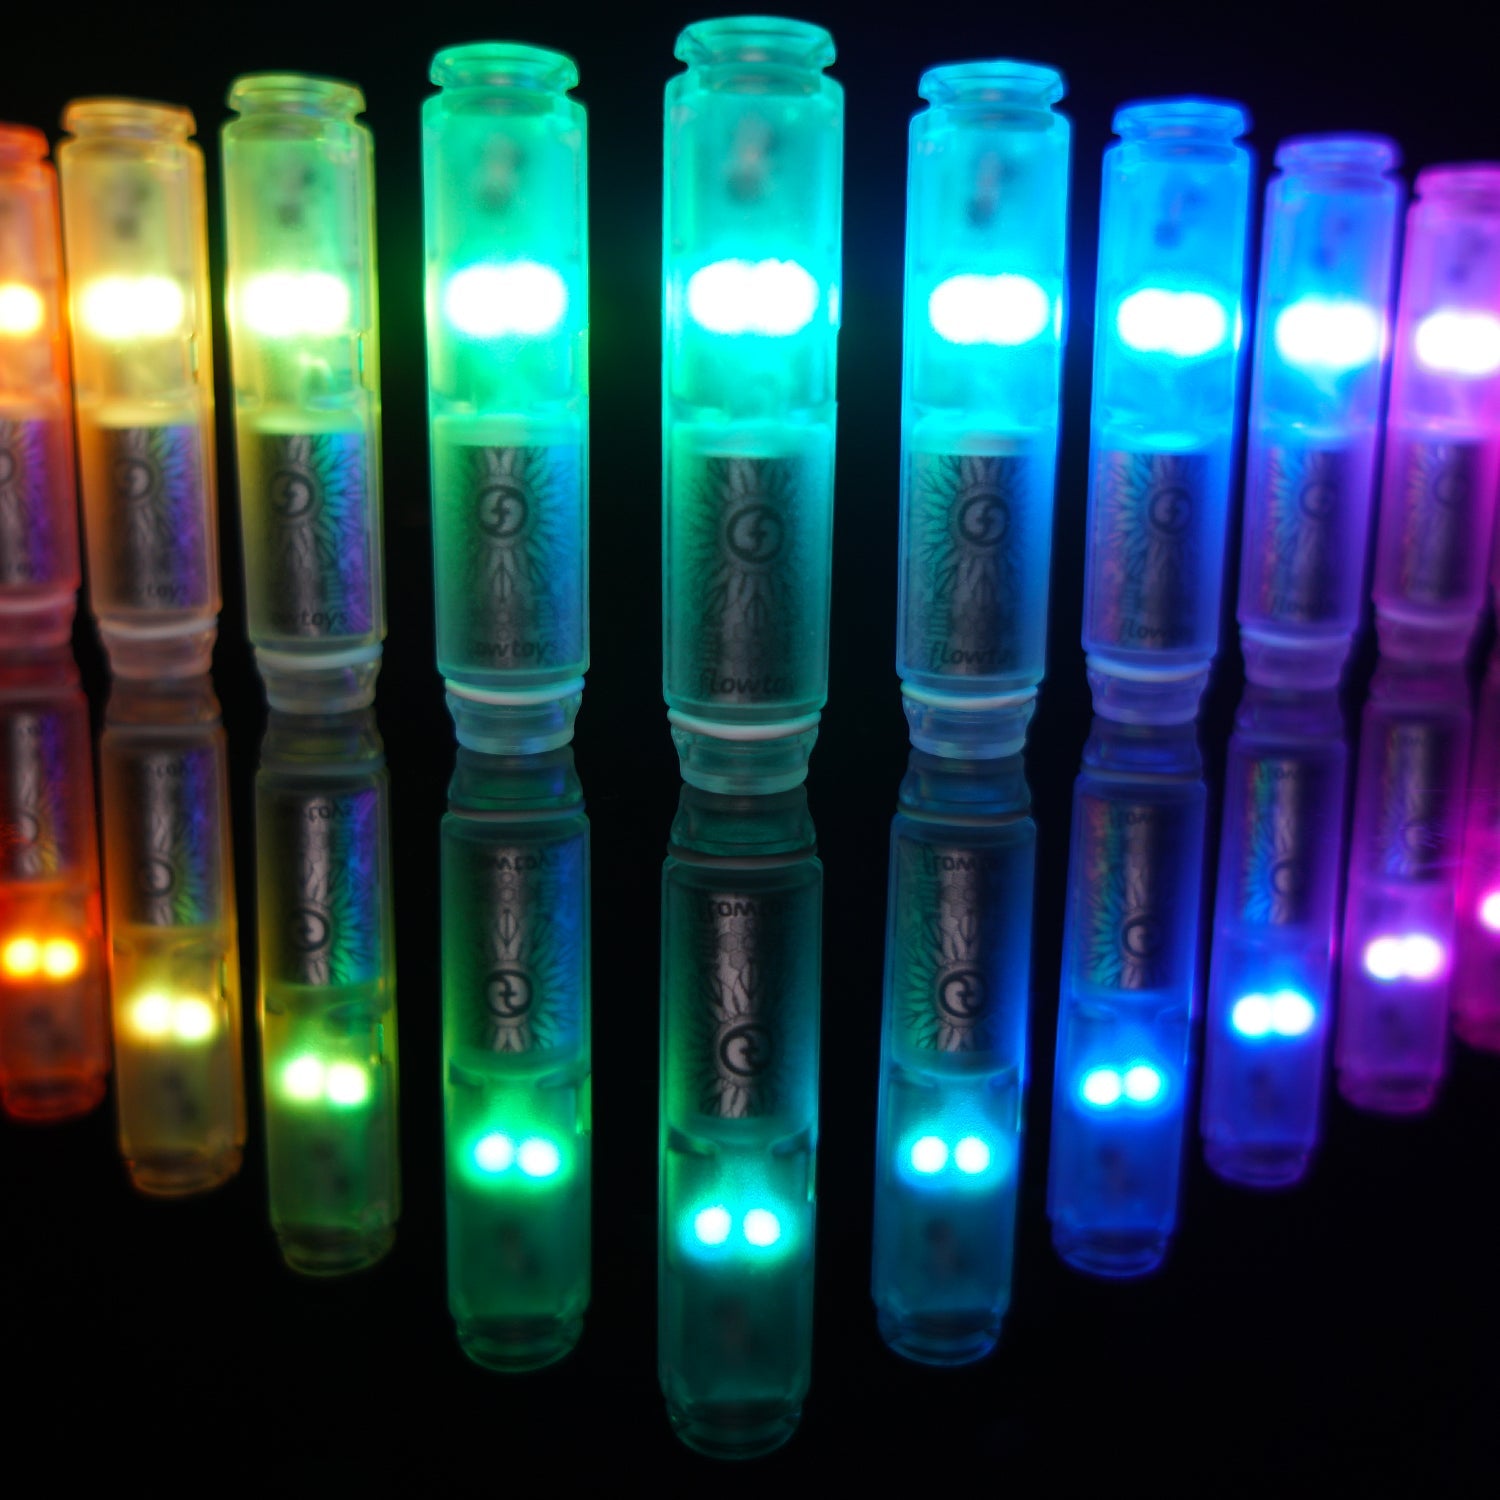 Selection of capsules lit up in different colours